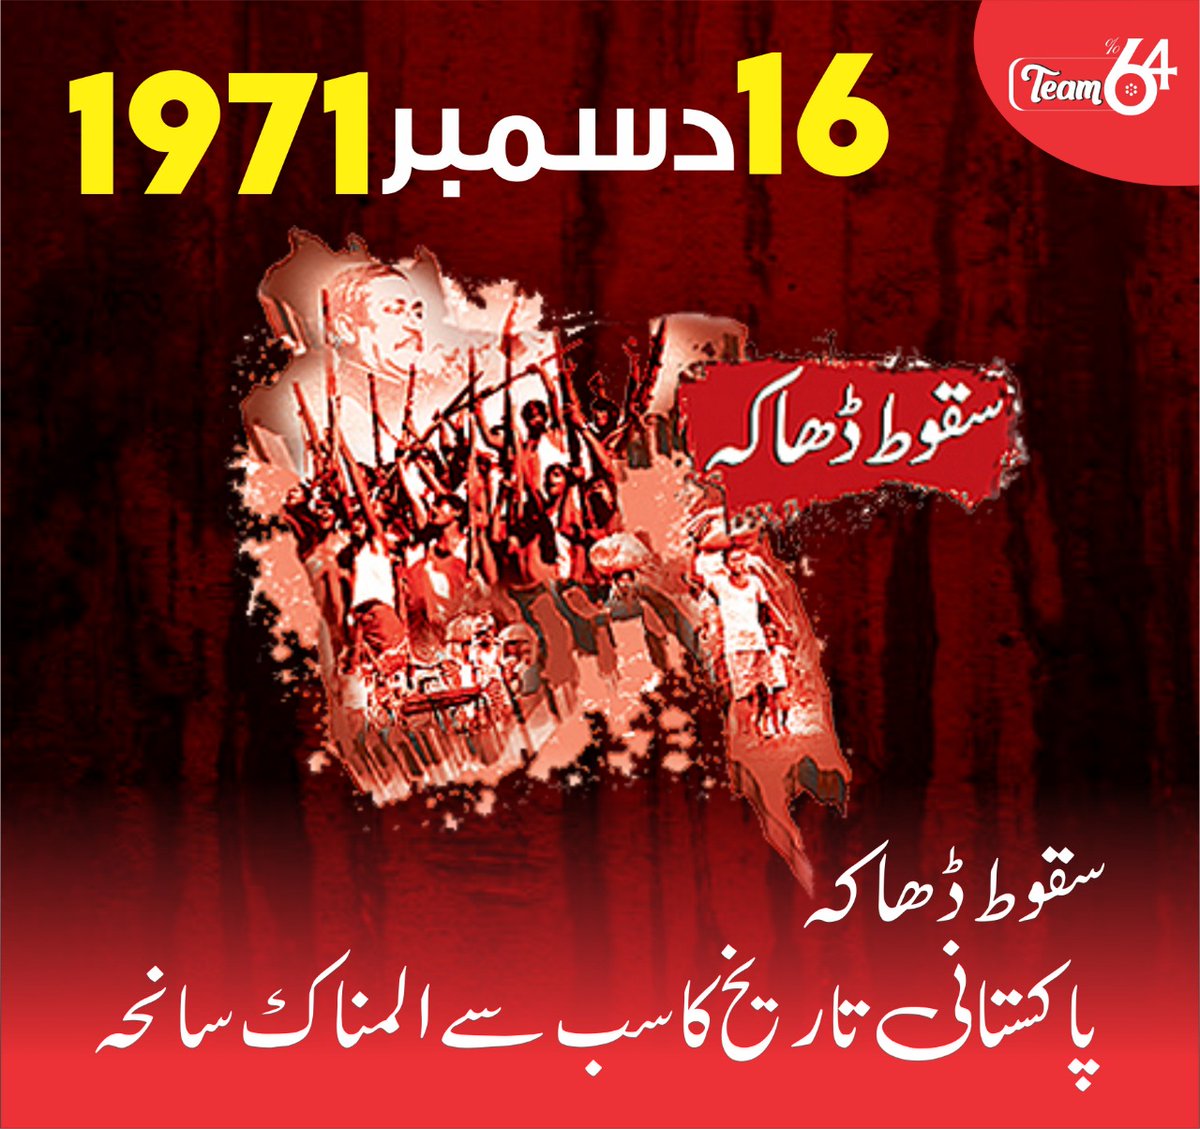 The fall of Dhaka is such a gruesome and painful event that will never be forgotten. We as a nation feel the pain of the unfortunate event of #Dhakafall even after decades. 
#ایک_اور_16دسمبر